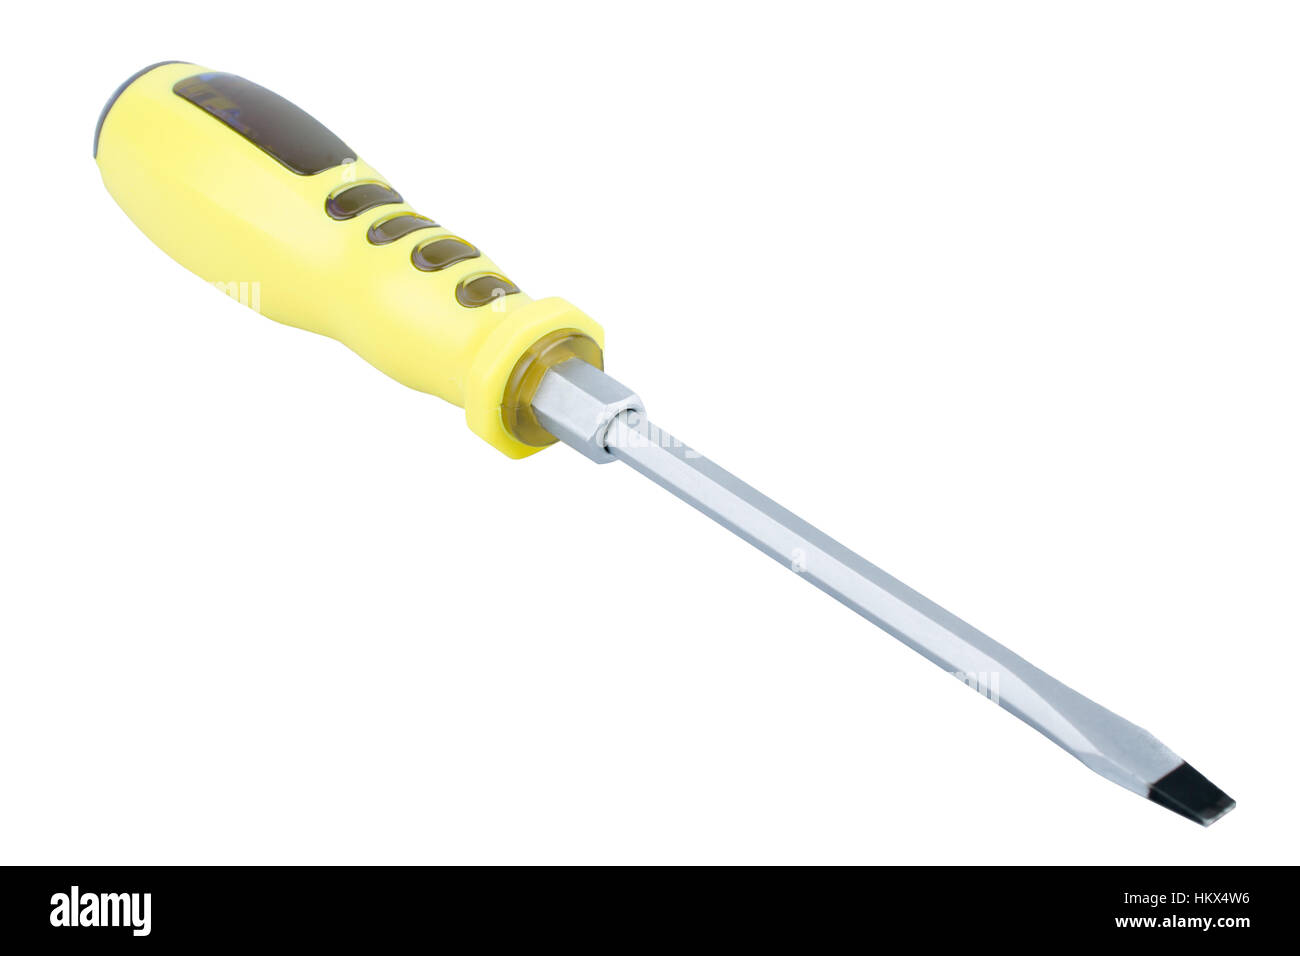 Yellow screwdriver isolated on white background Stock Photo